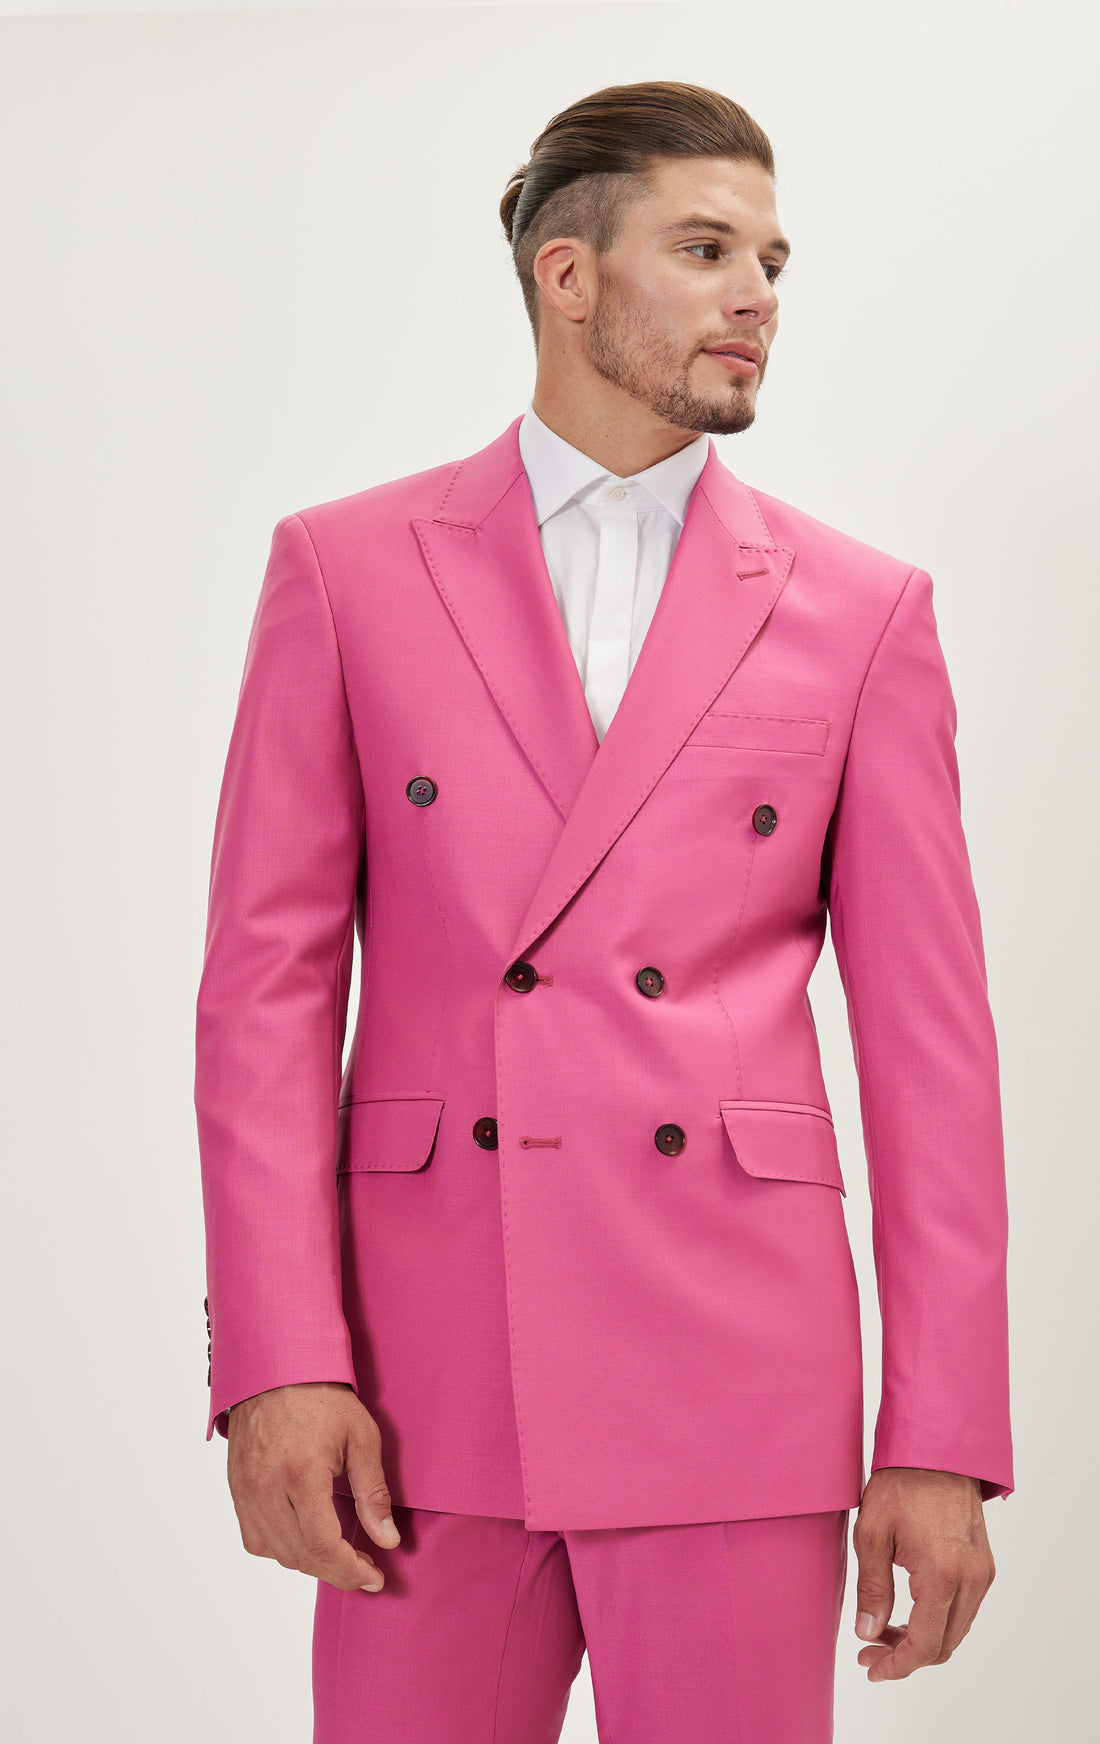 Super 120S Merino Wool Double Breasted Suit - Raspberry Pink Ish Red